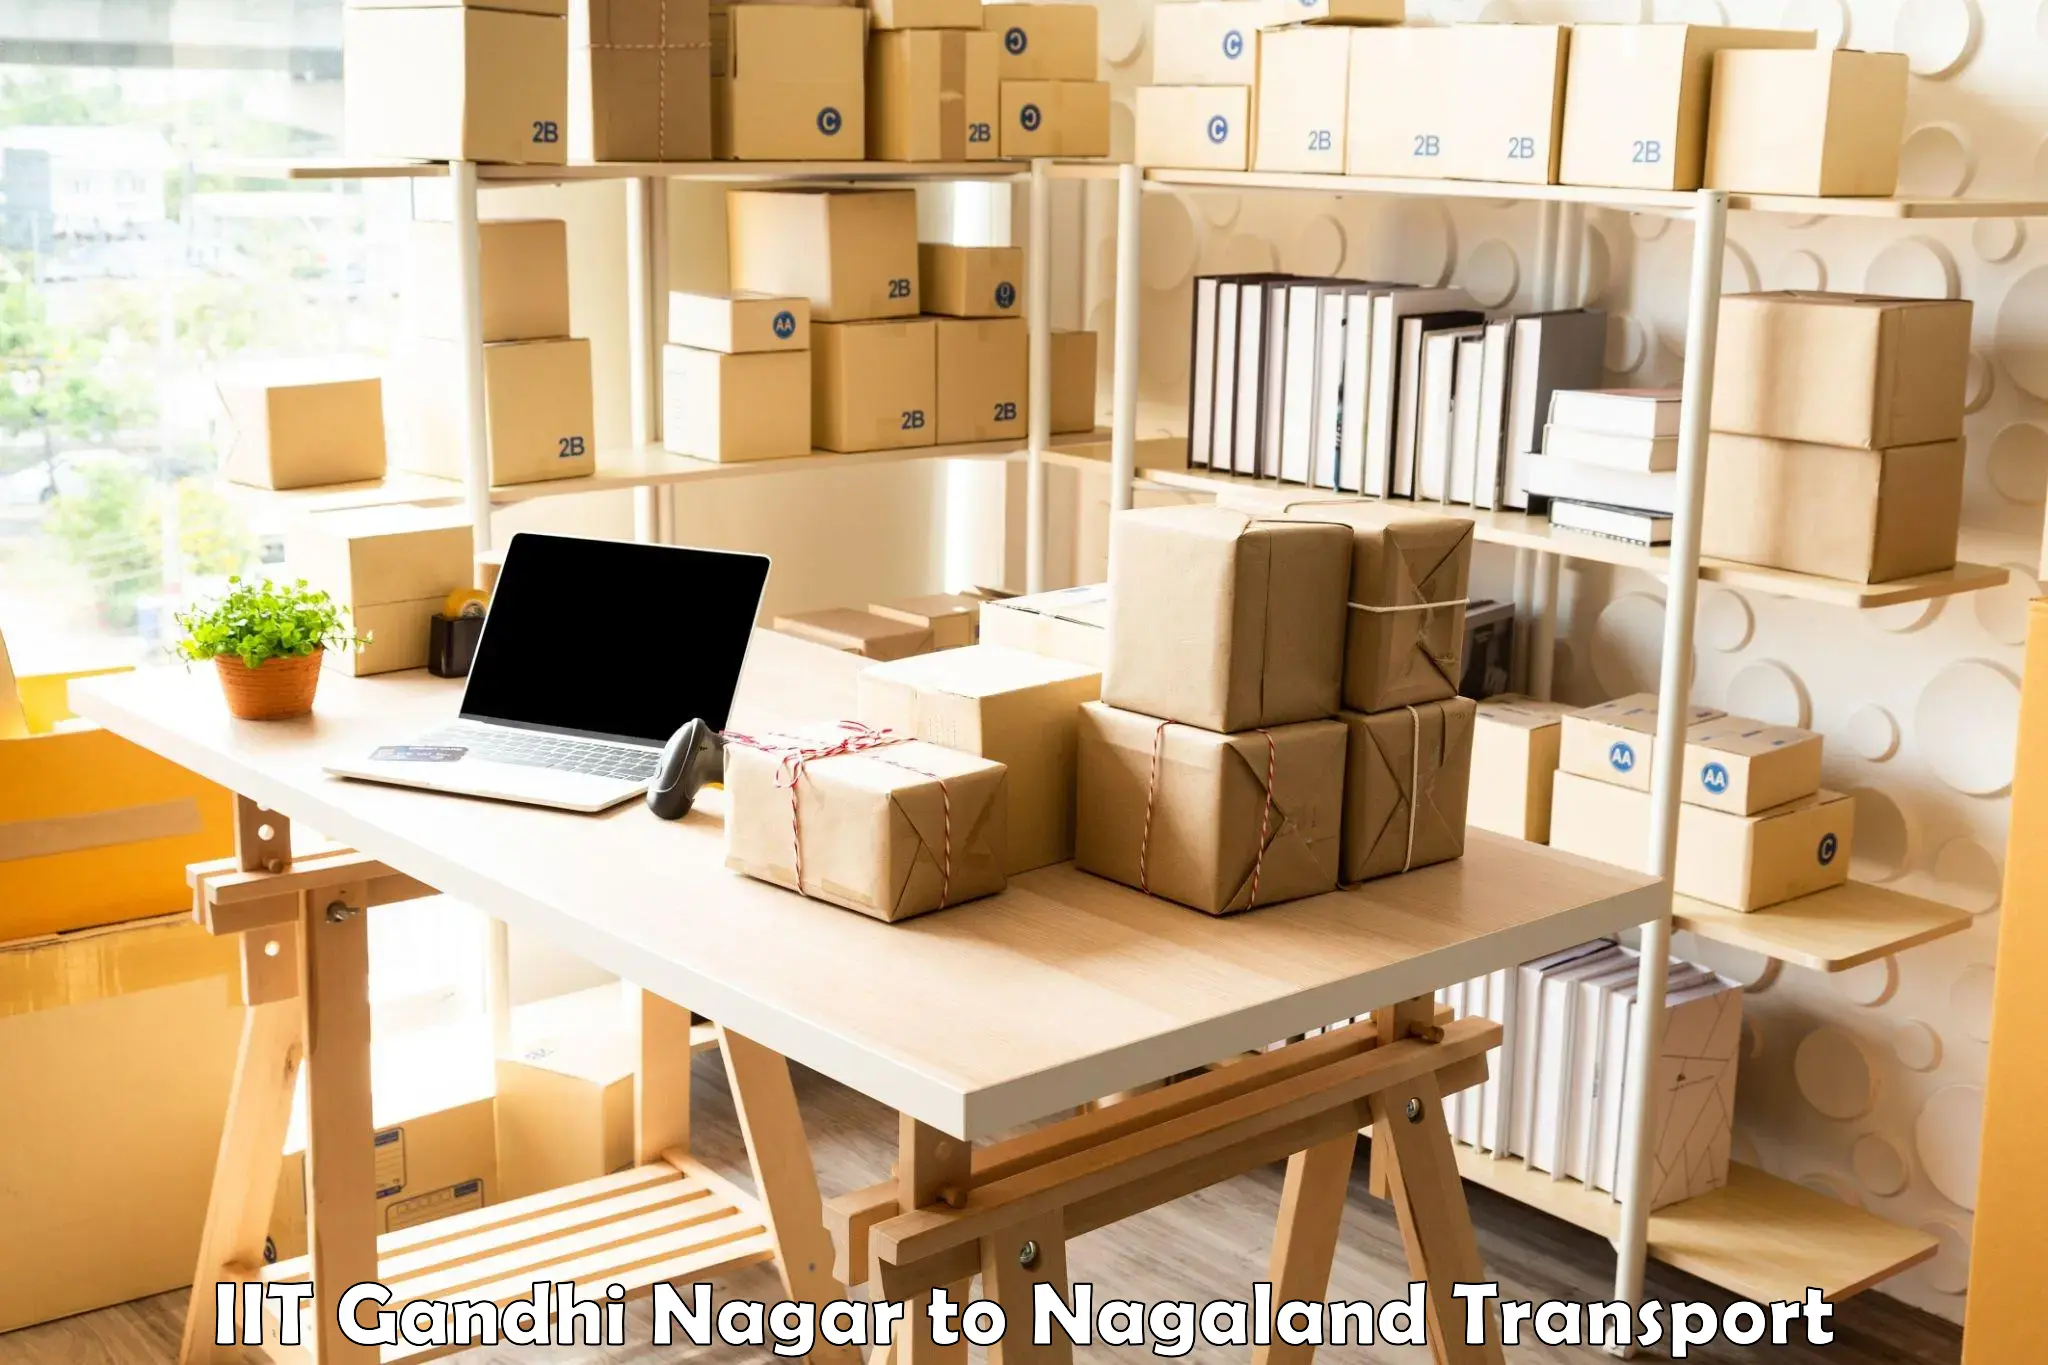 Container transportation services in IIT Gandhi Nagar to Nagaland